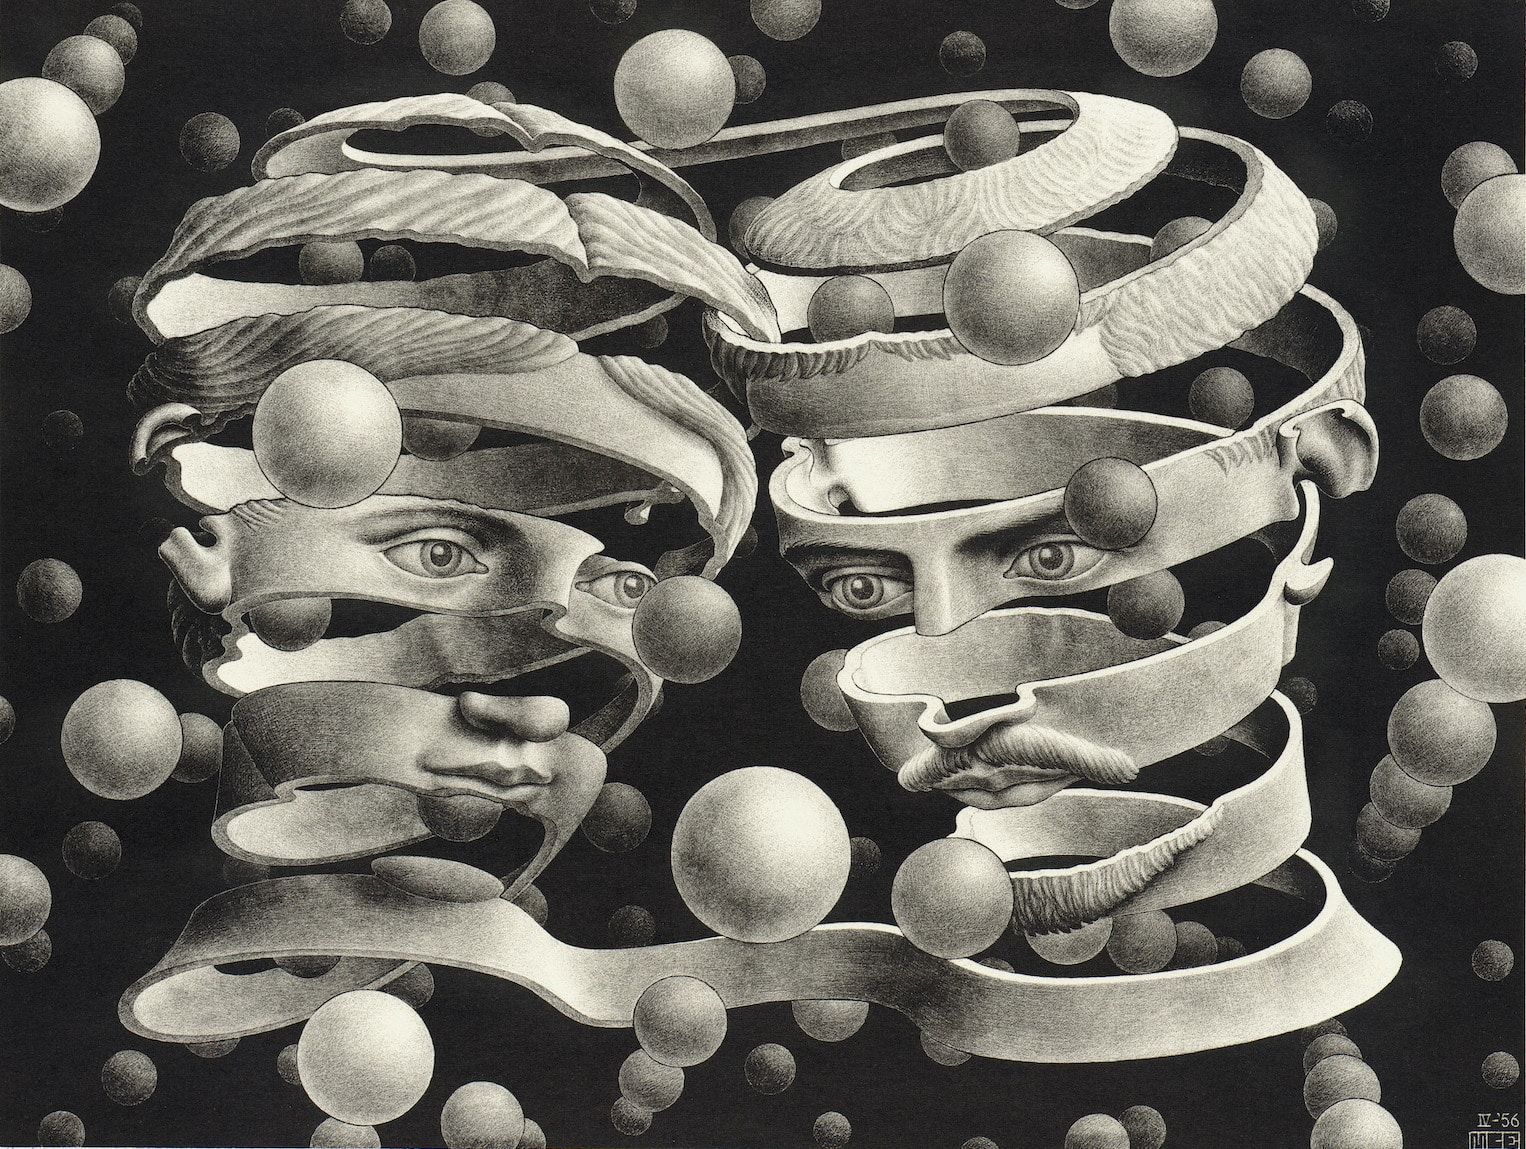 M.C. Escher’s Infinitely Intriguing Art Gets the Hollywood Treatment